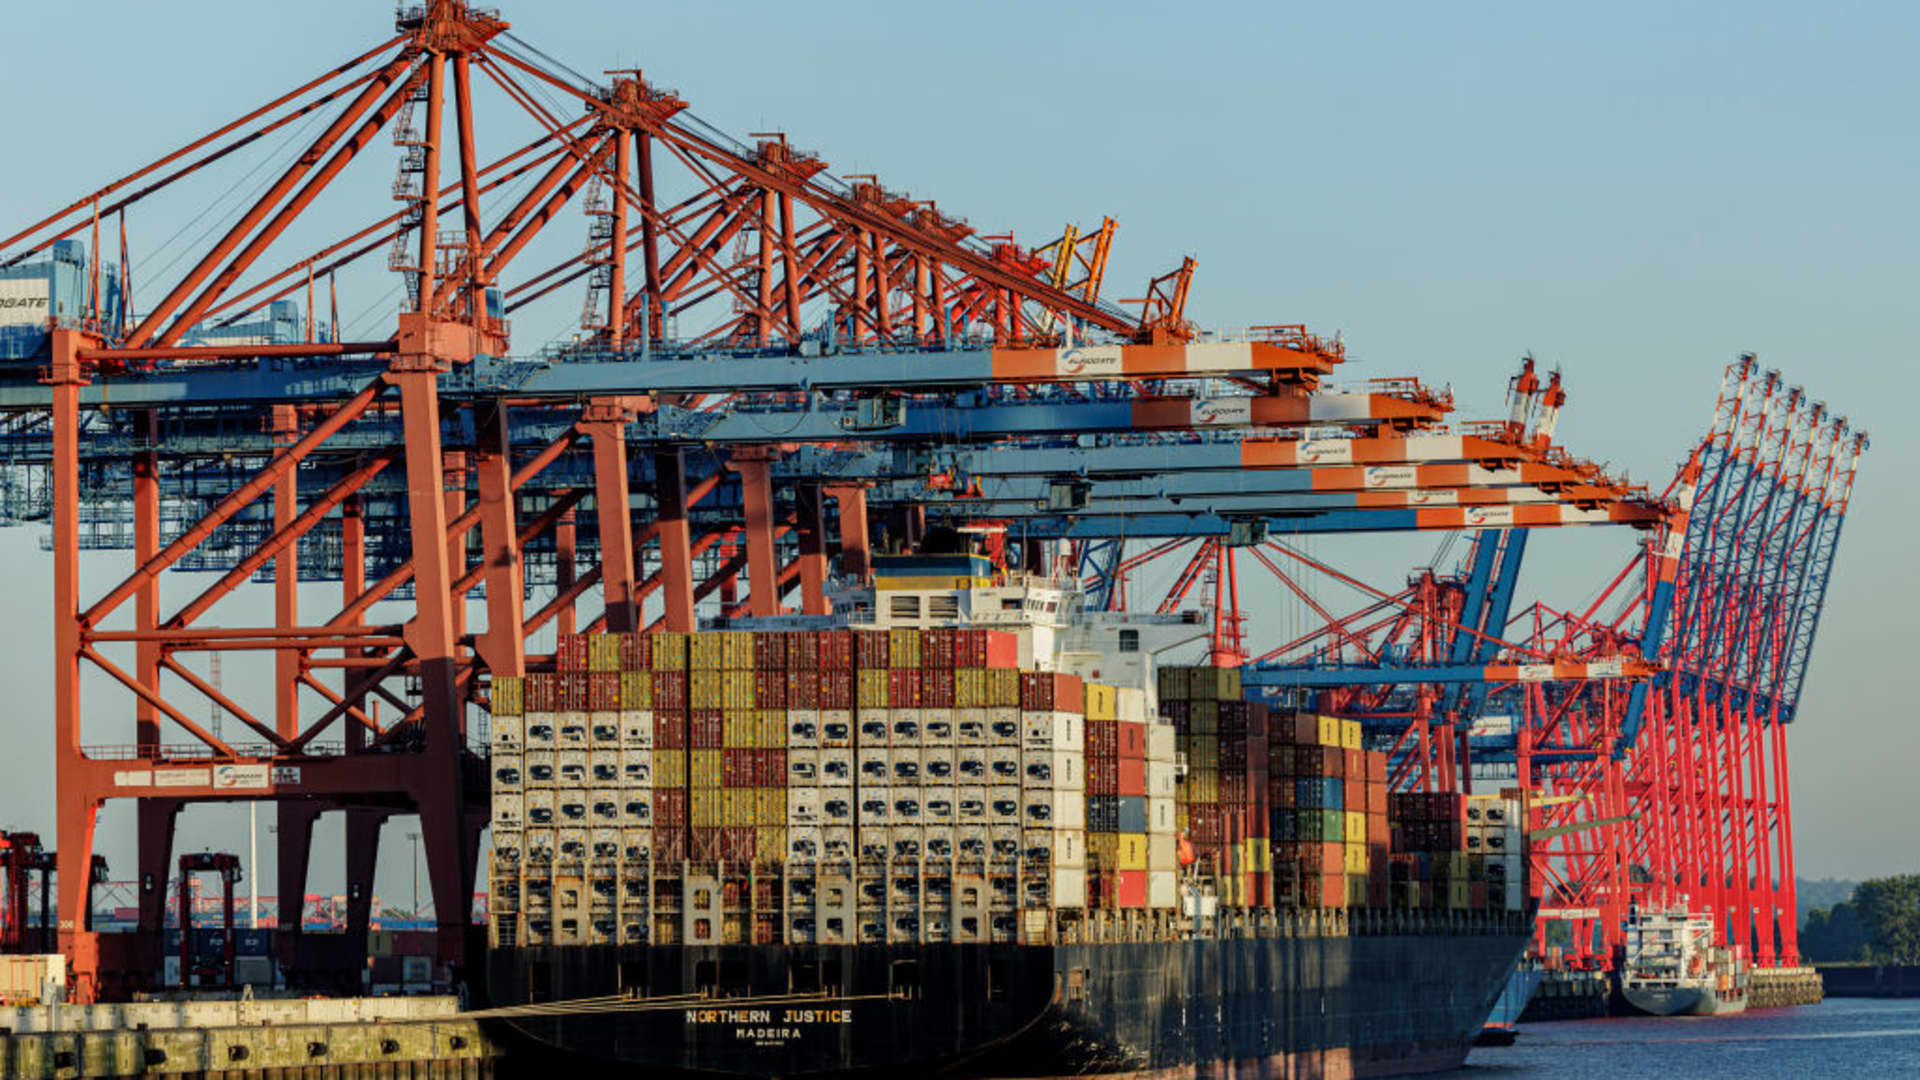 Germany’s much-vaunted trade surplus disappears as import prices surge